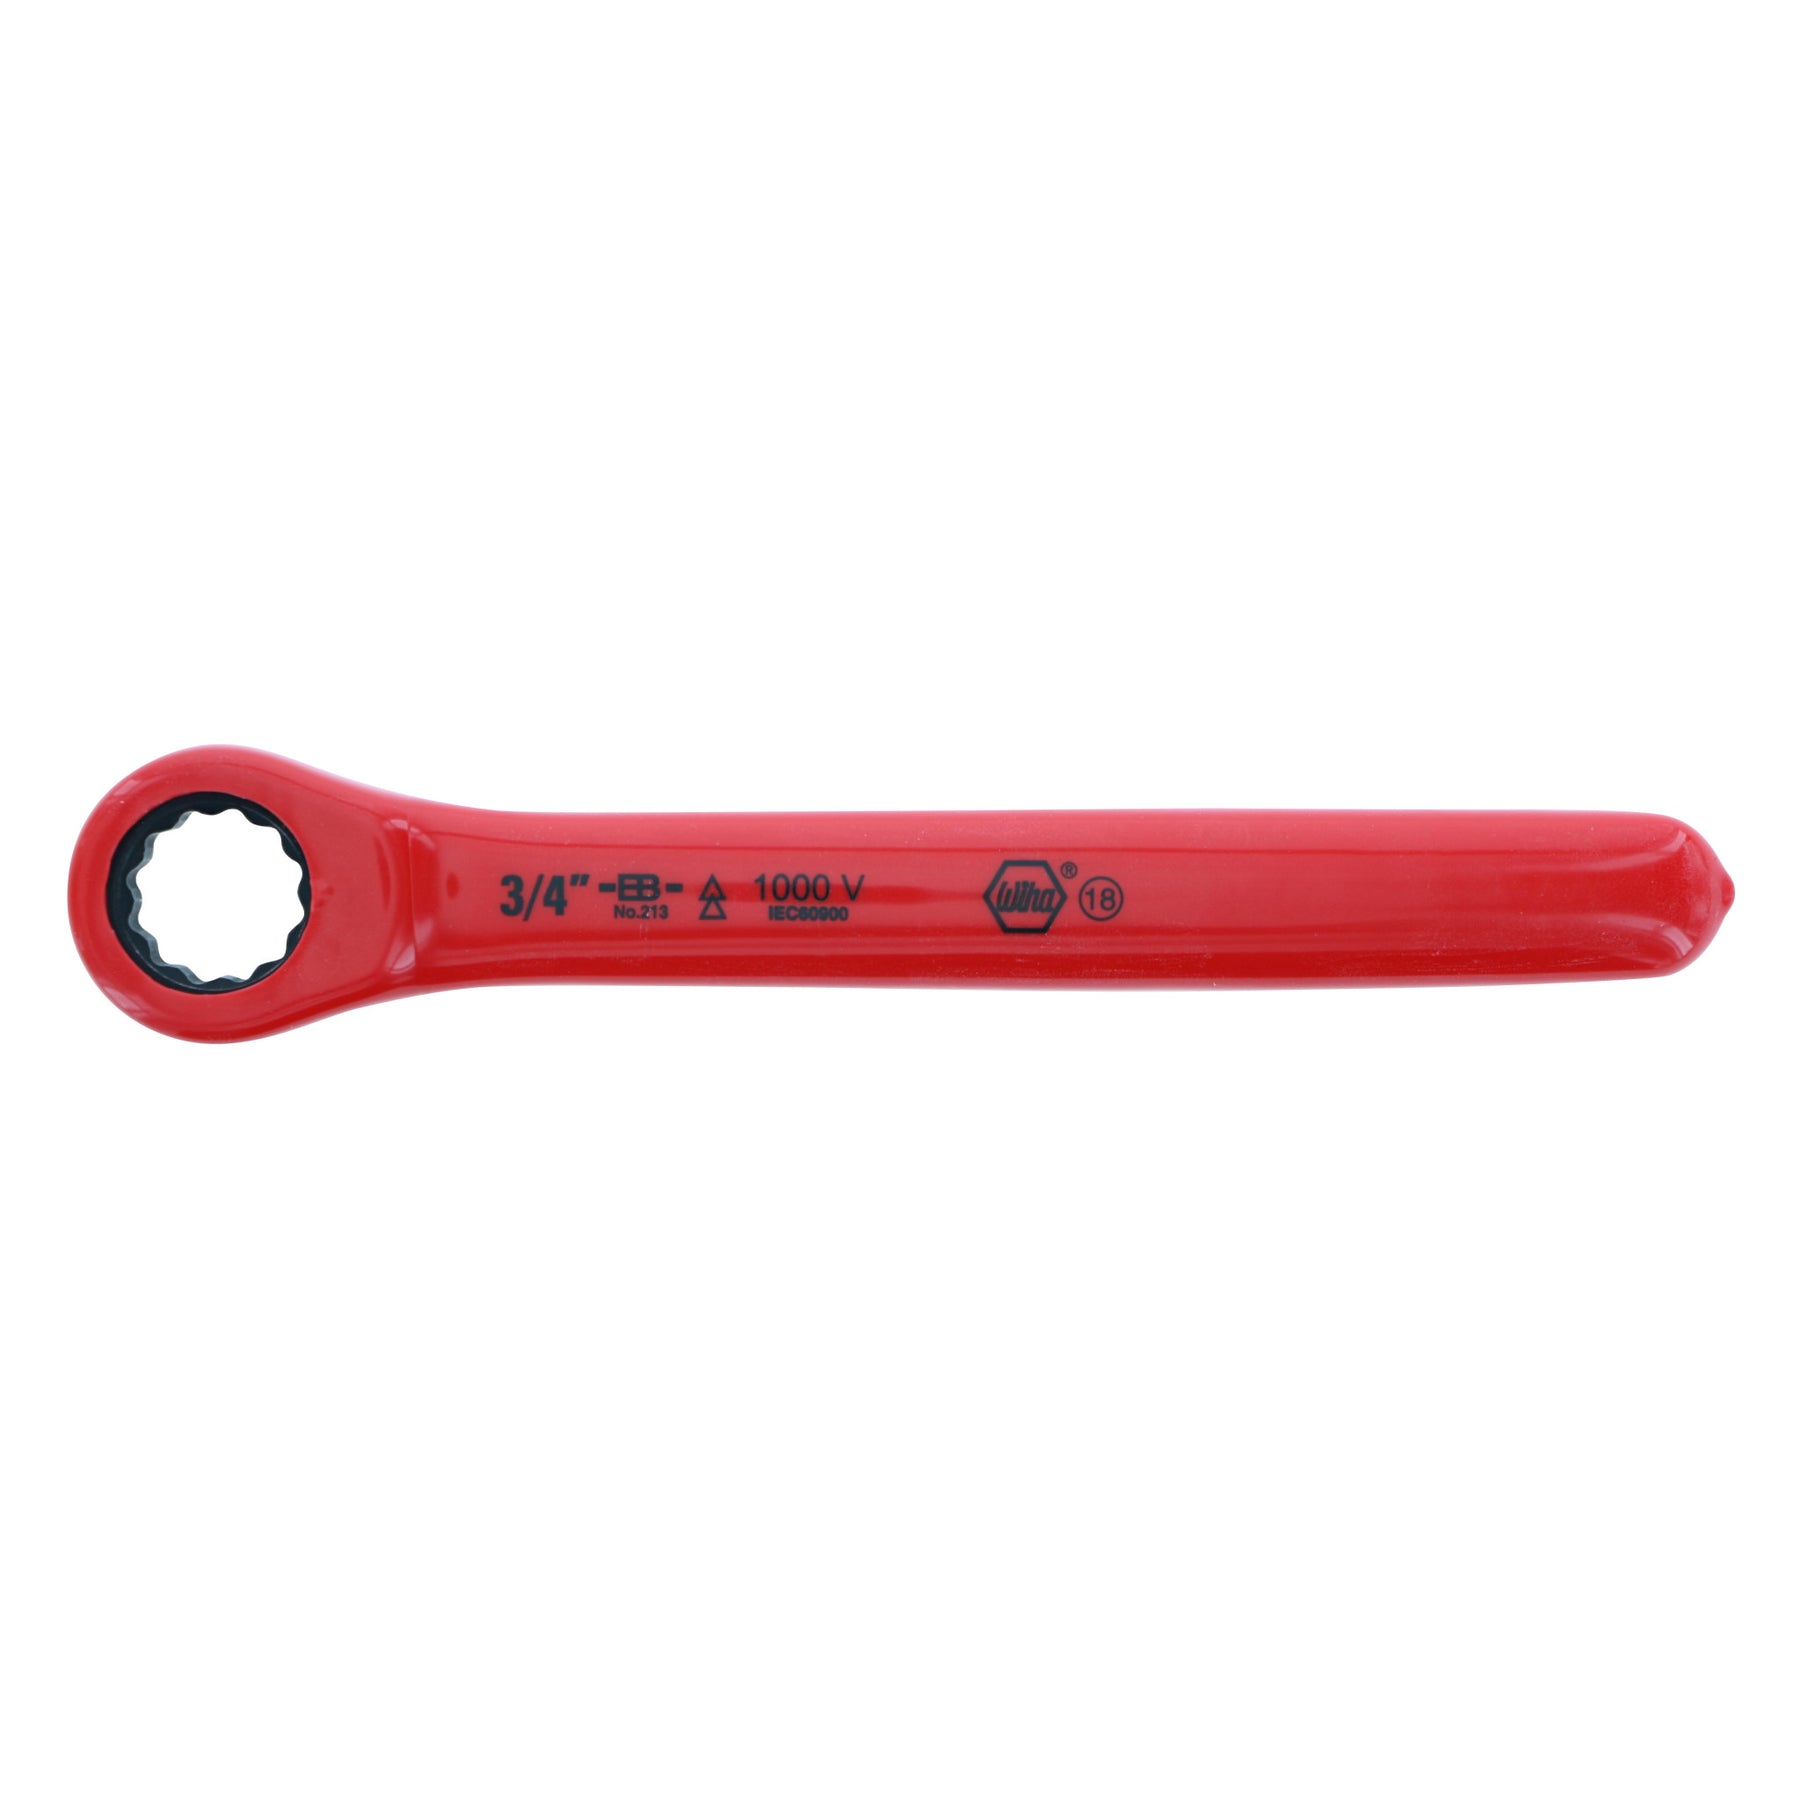 Insulated Ratchet Wrench 3/4"